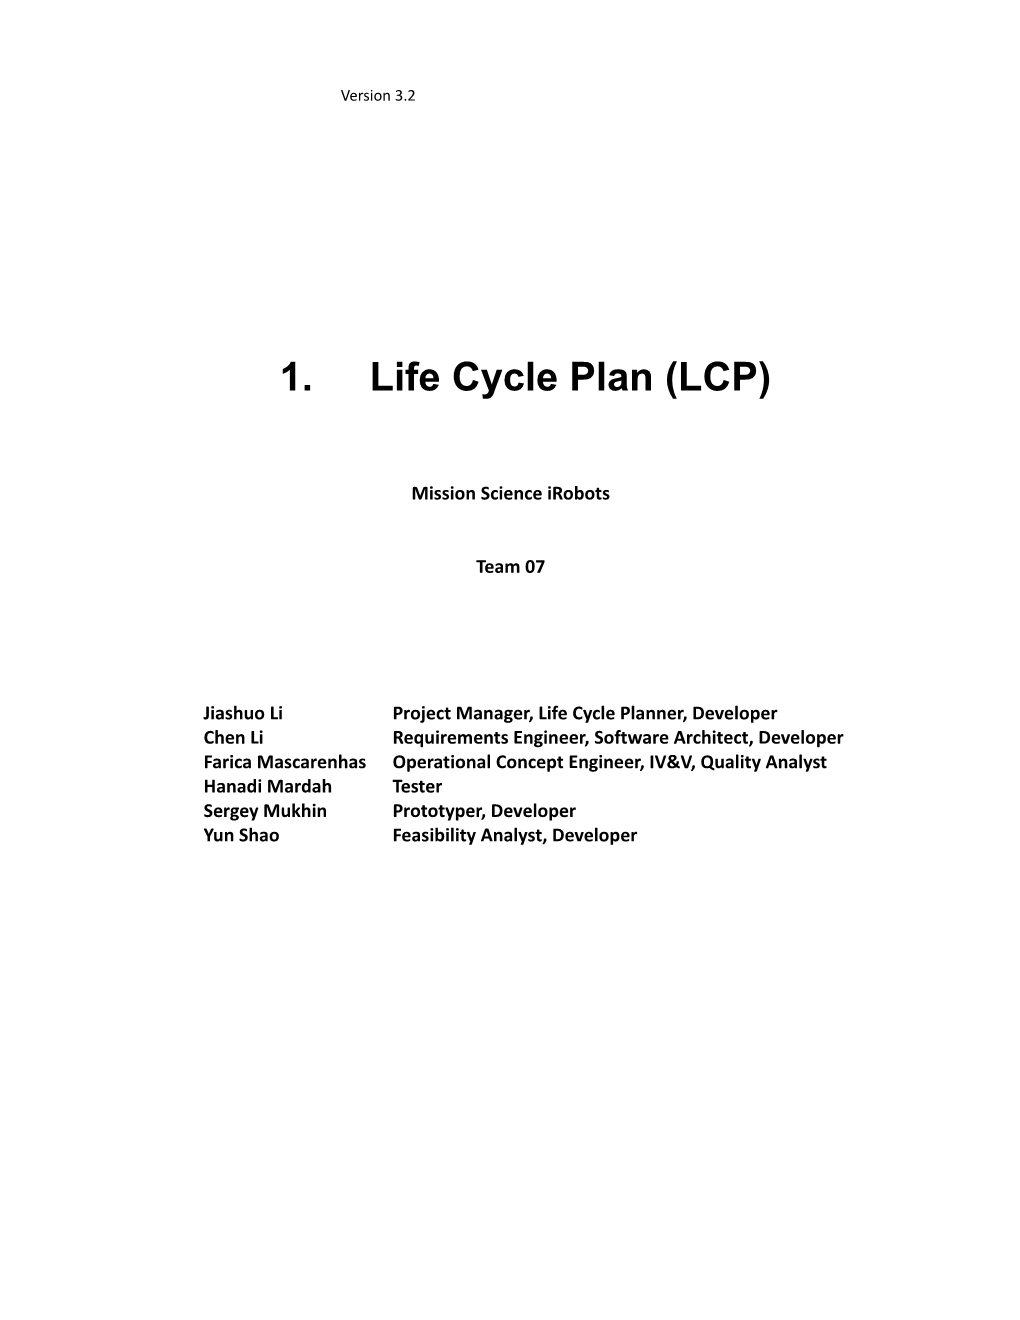 Life Cycle Plan (LCP) s3